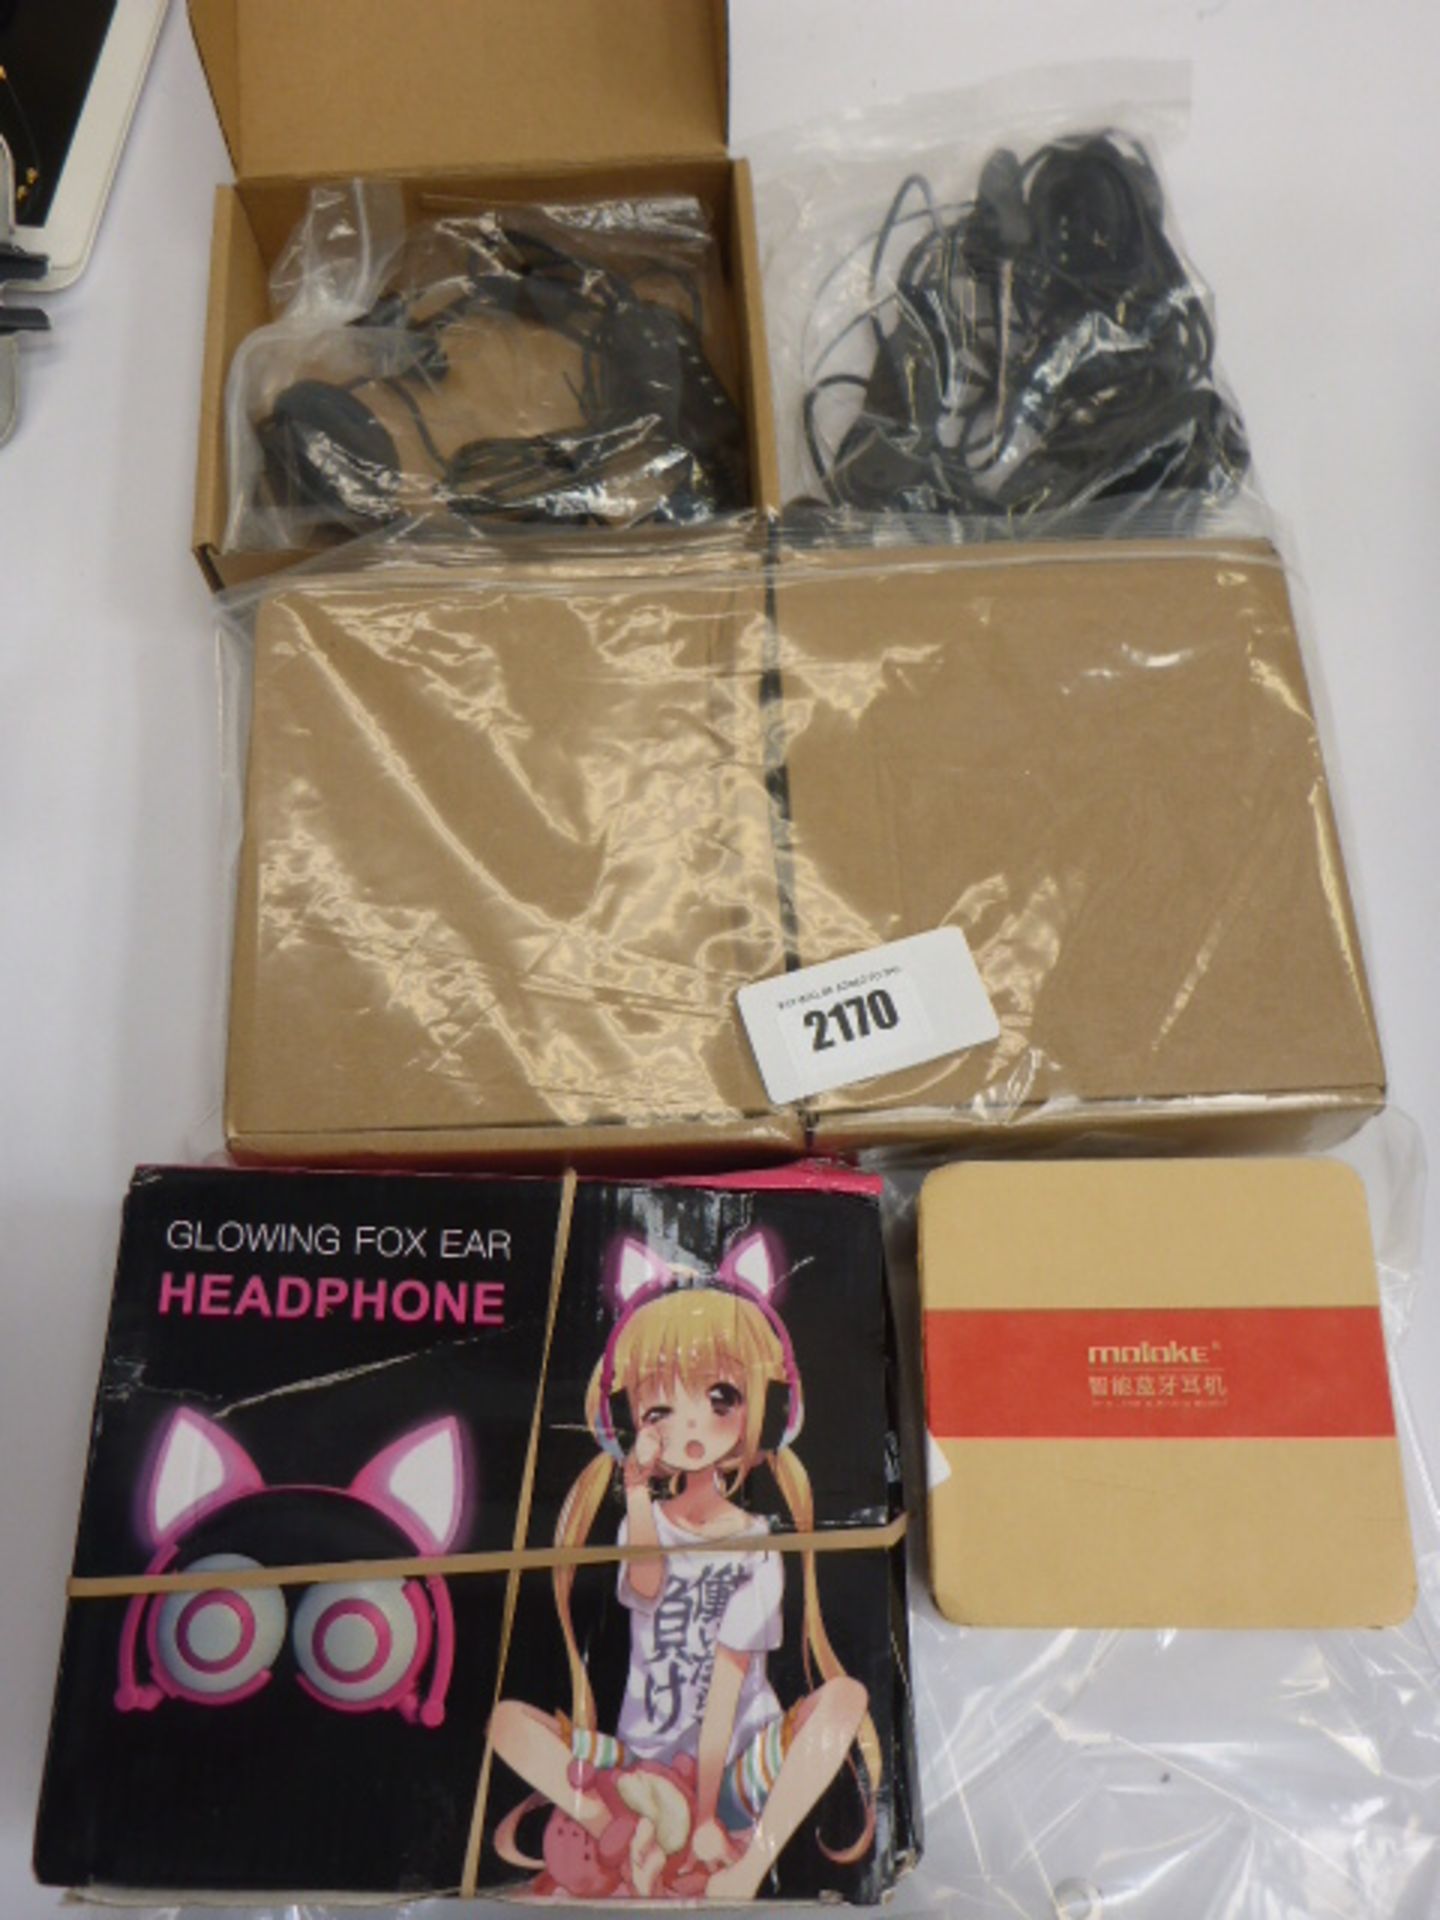 Quantity of headsets in bag